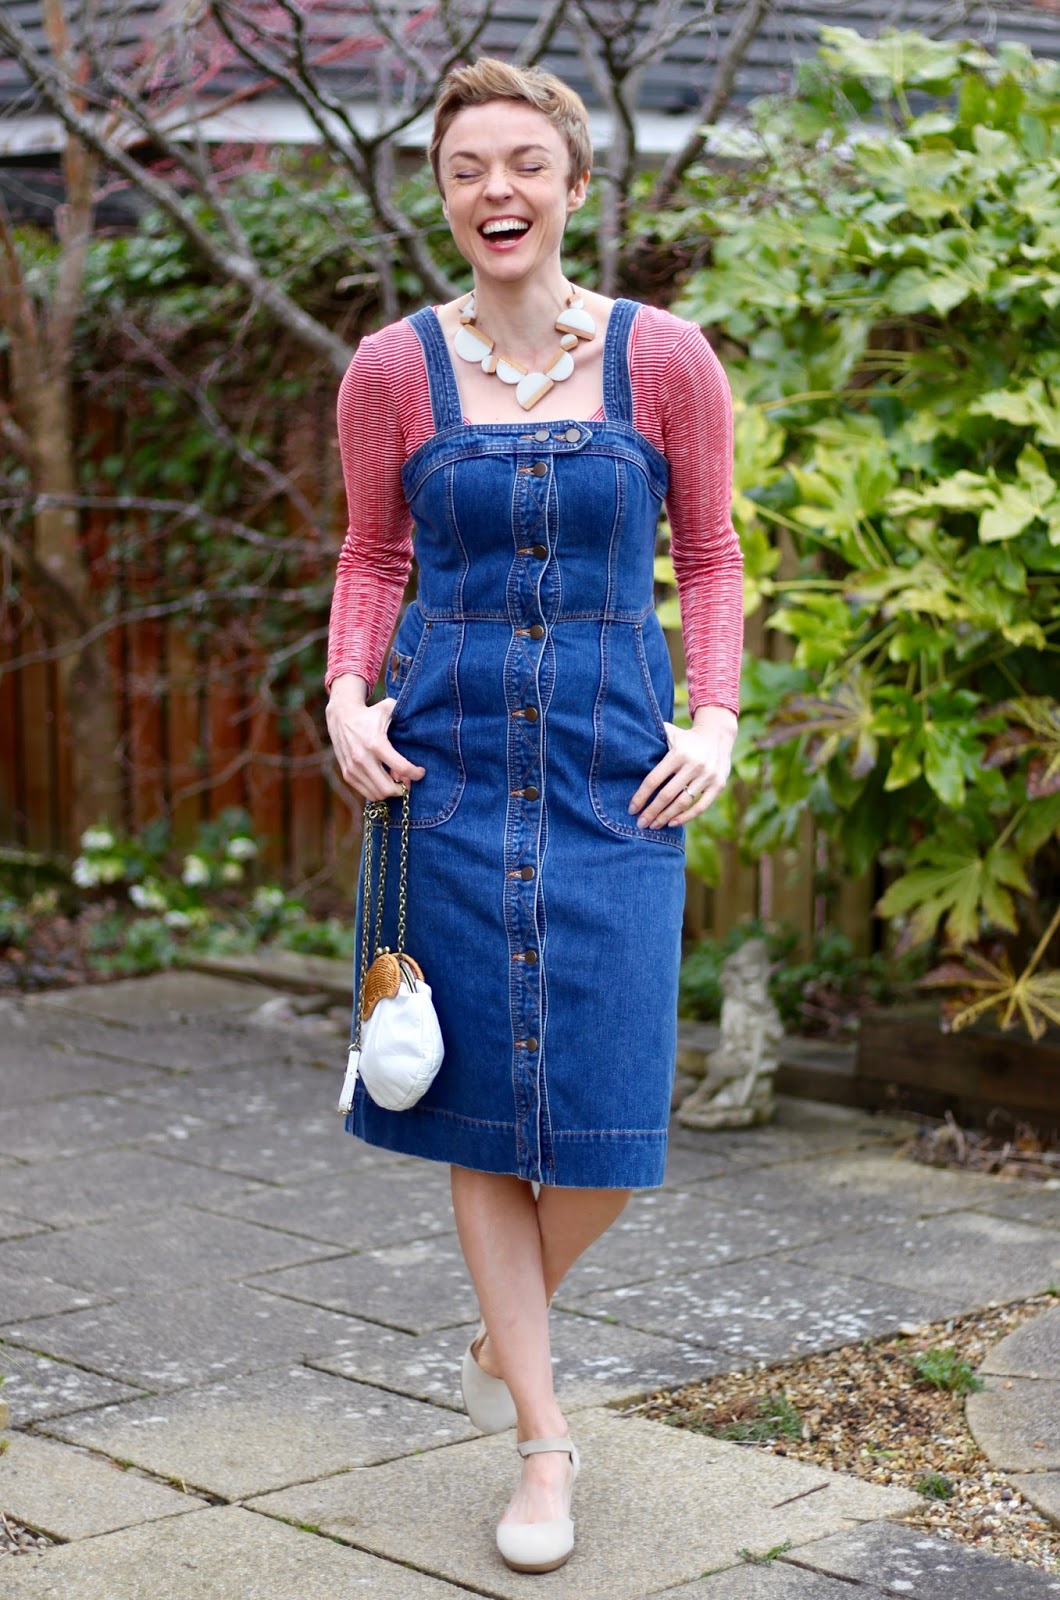 Denim Pinafore Dress & Red Stripes | Casual Style over 40 | Fake Fabulous